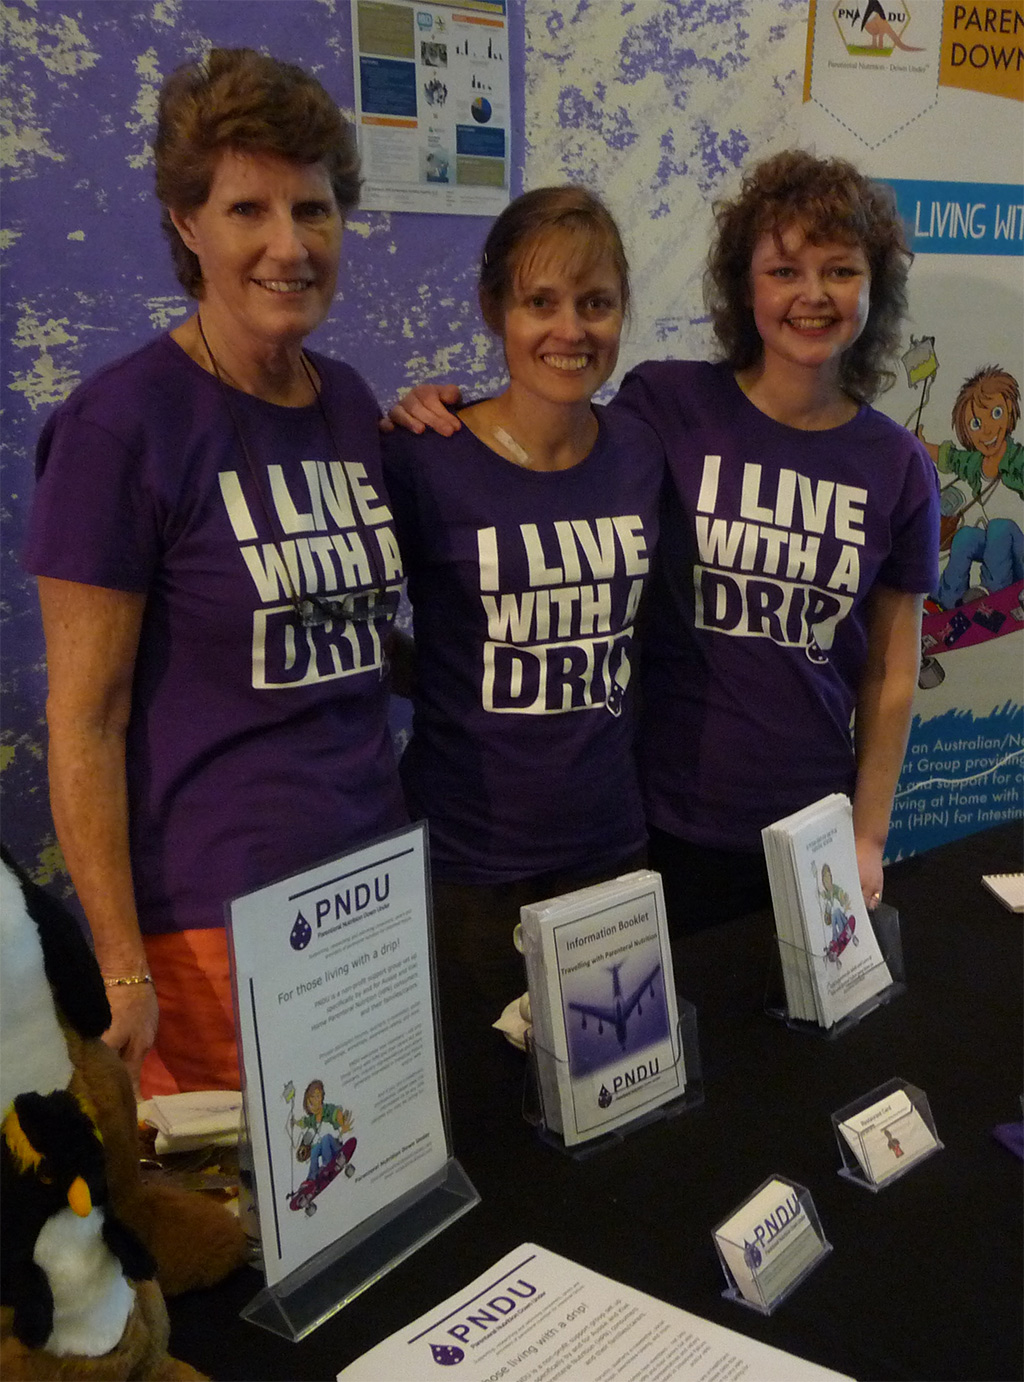 Women at PNDU stand wearing I Live With A Drip tshirts